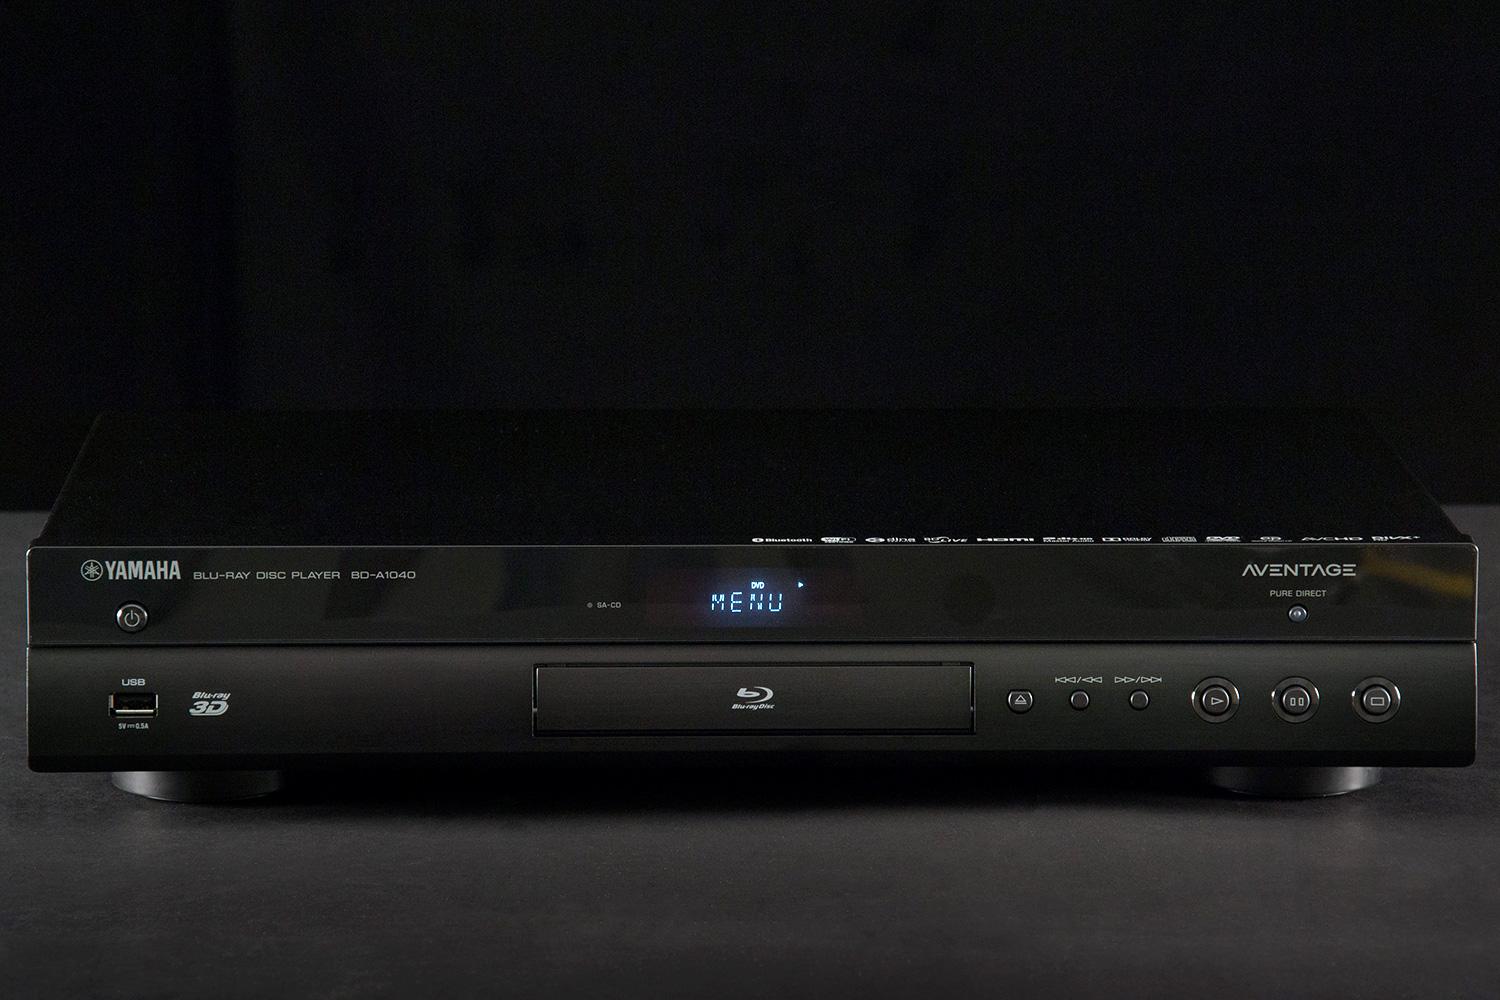 Yamaha Aventage BD-A1040 Blu-ray player review | Digital Trends